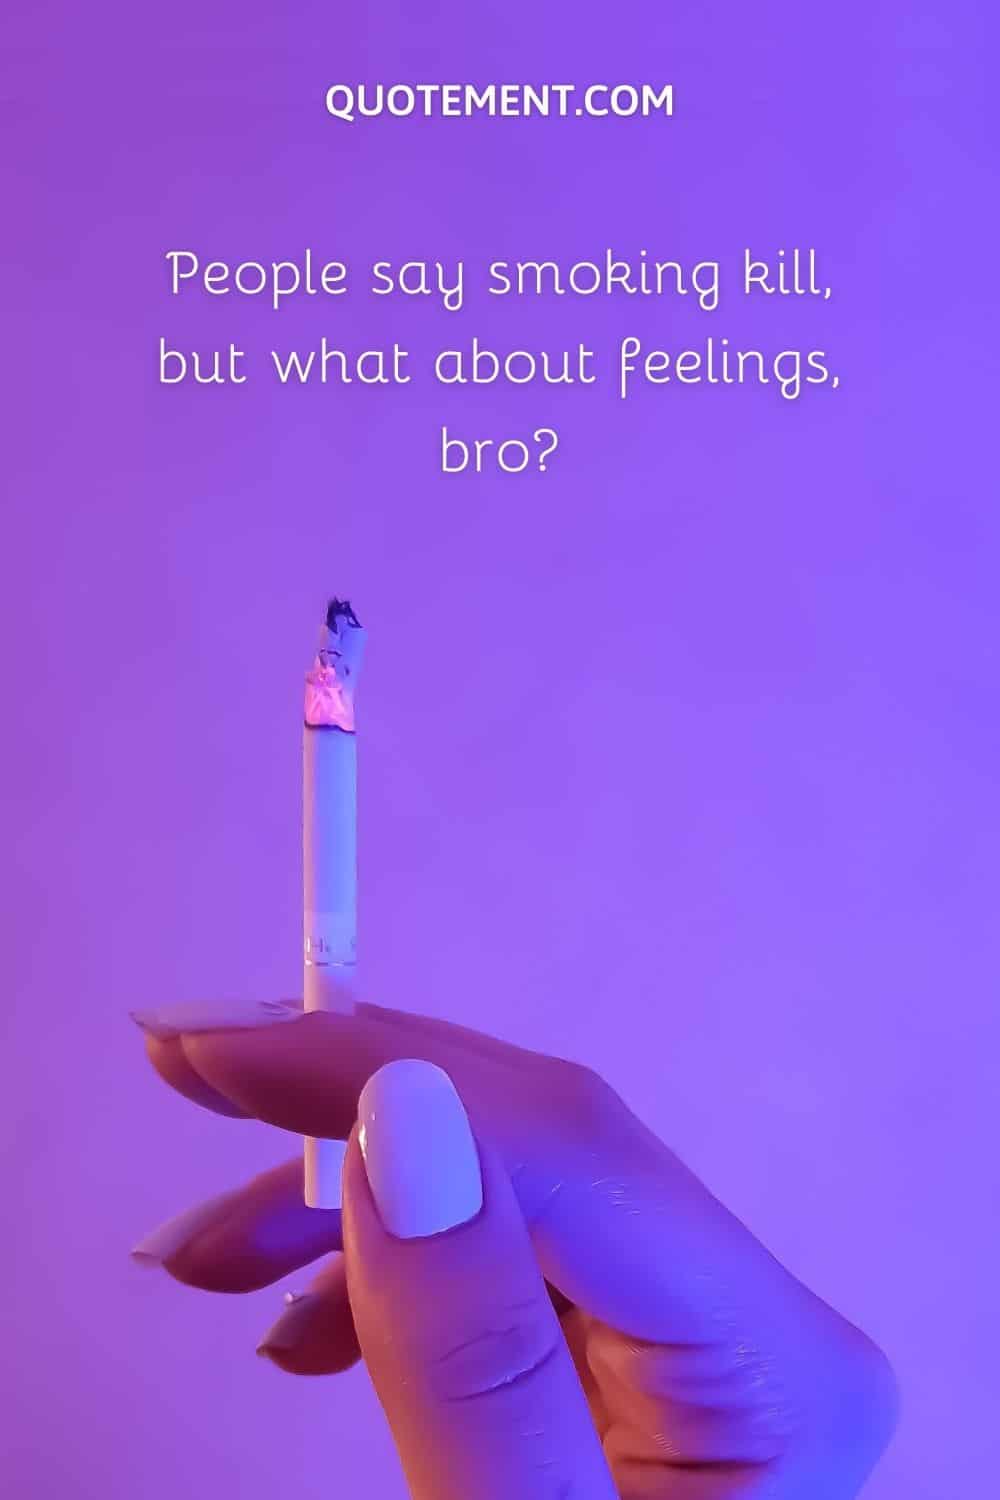 People say smoking kill, but what about feelings, bro